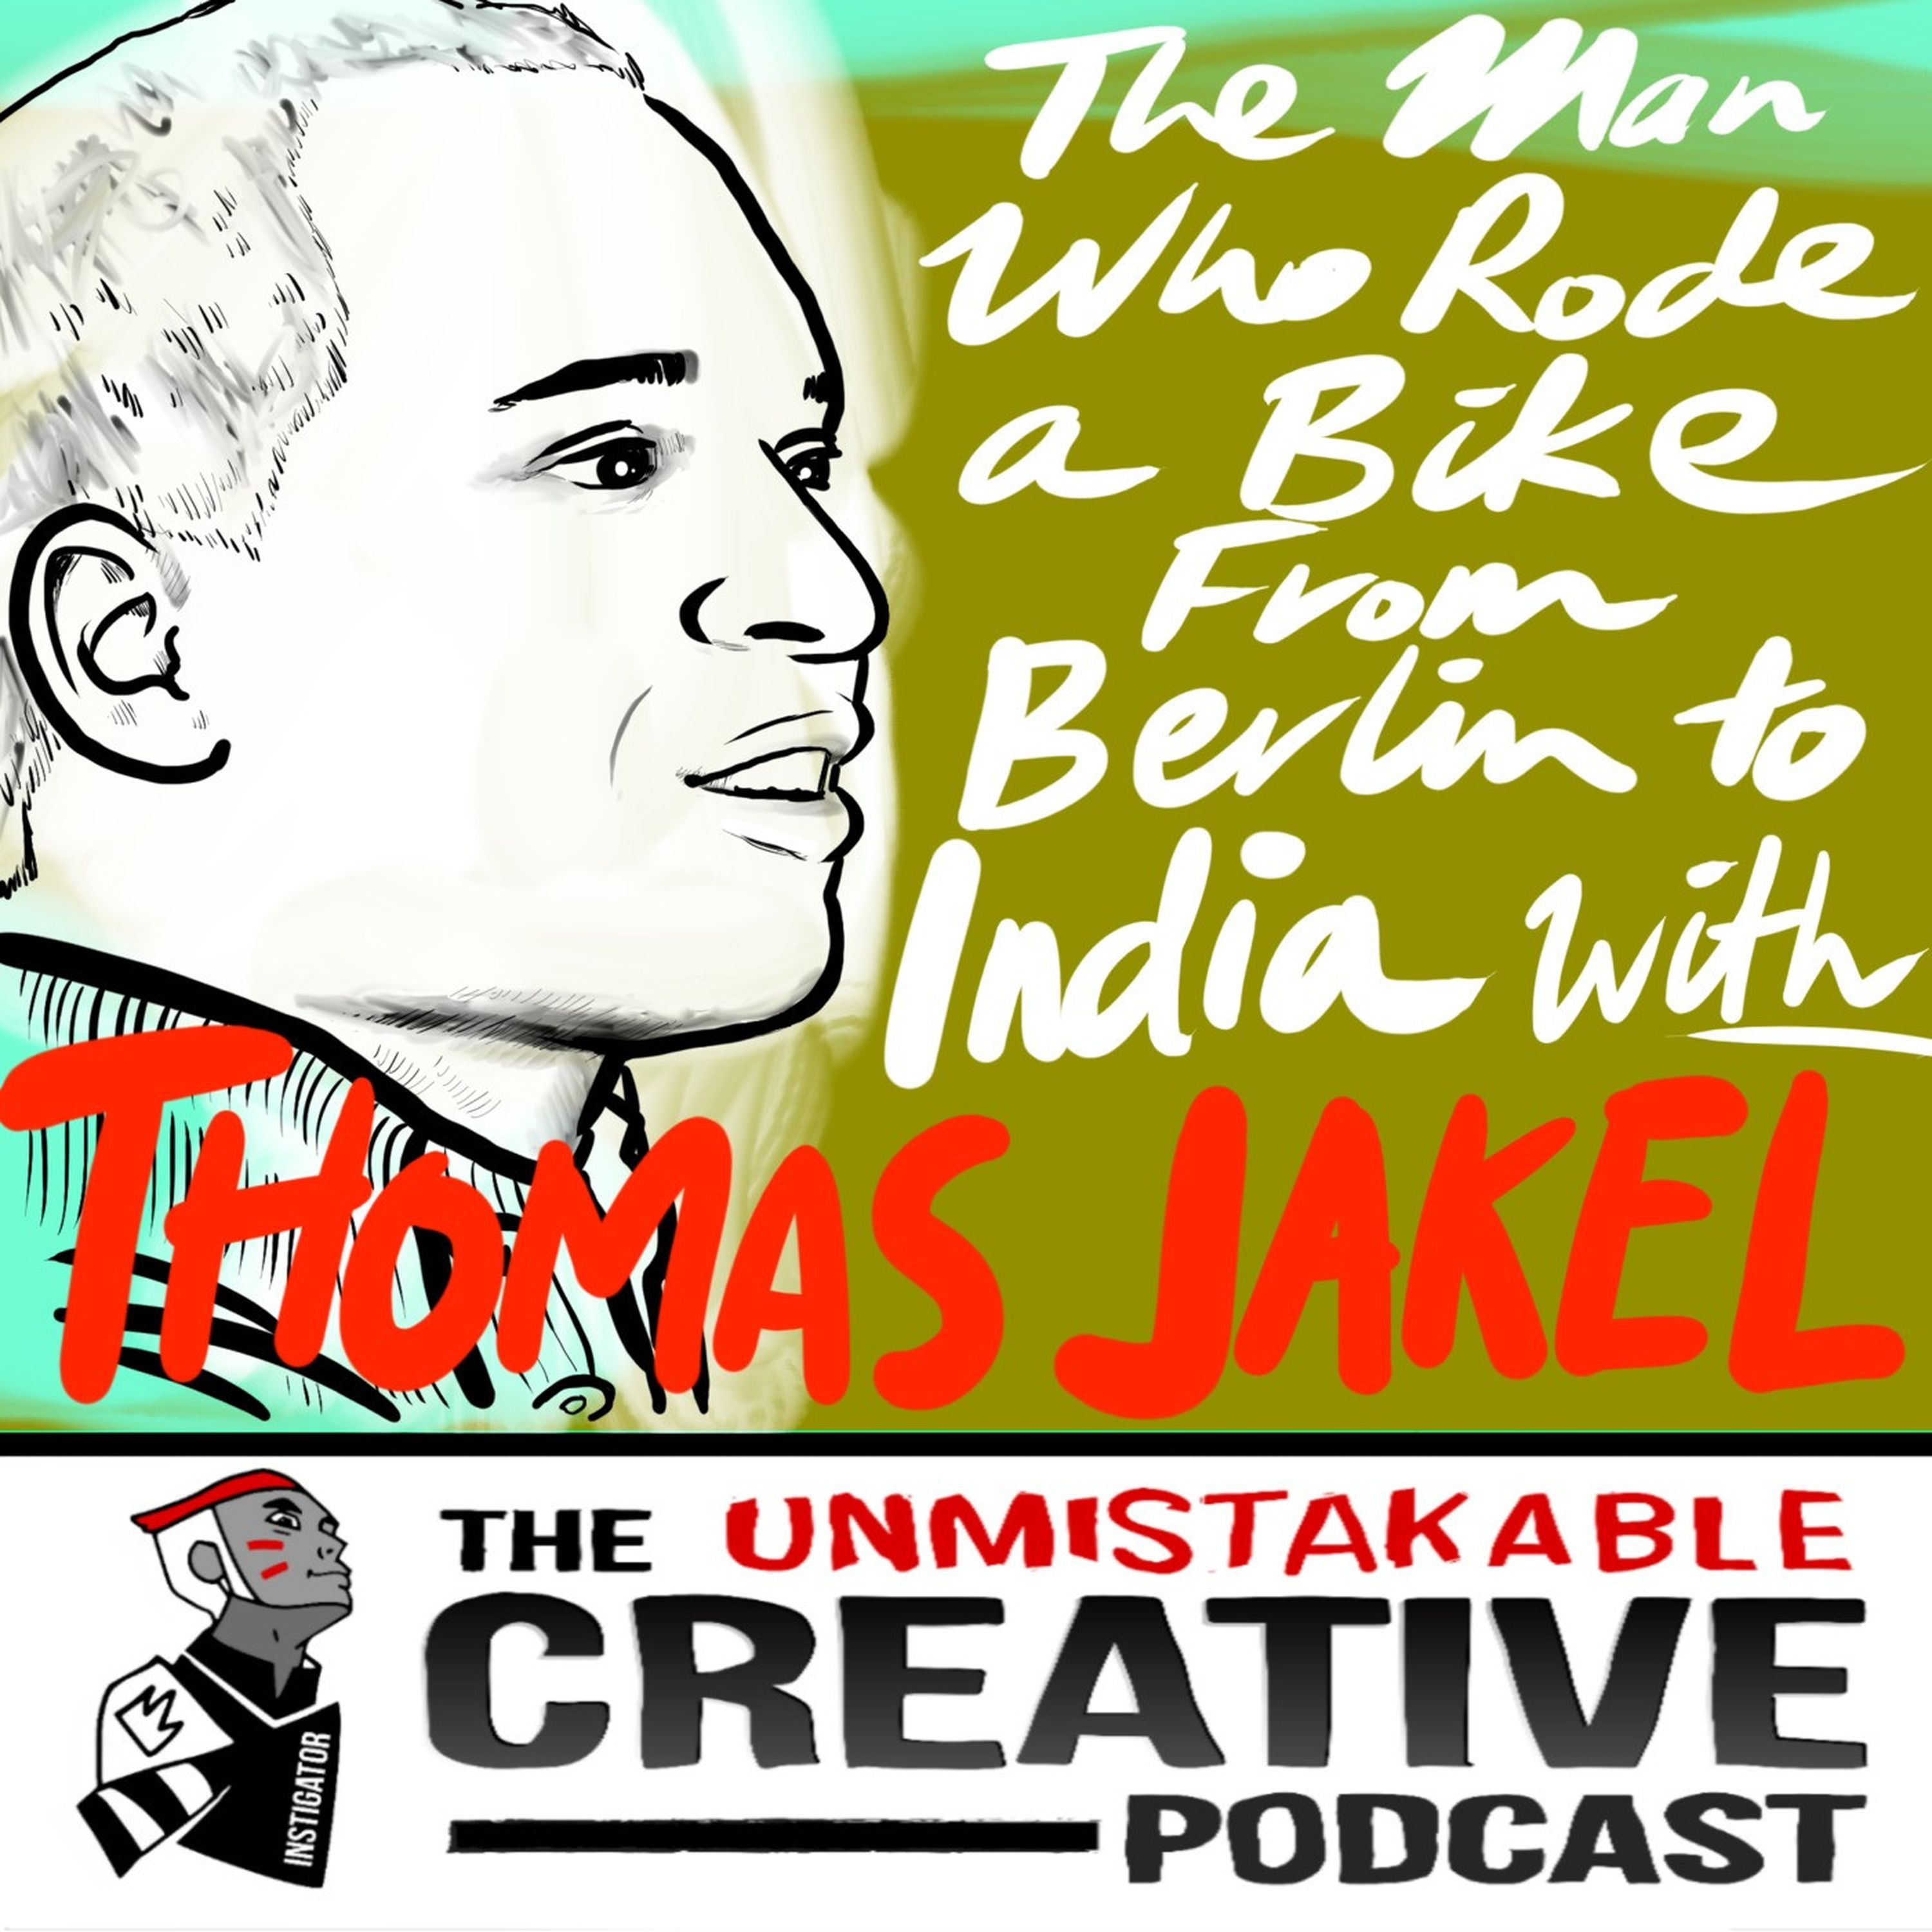 The Man Who Rode a Bike from Berlin To India with Thomas Jakel Image